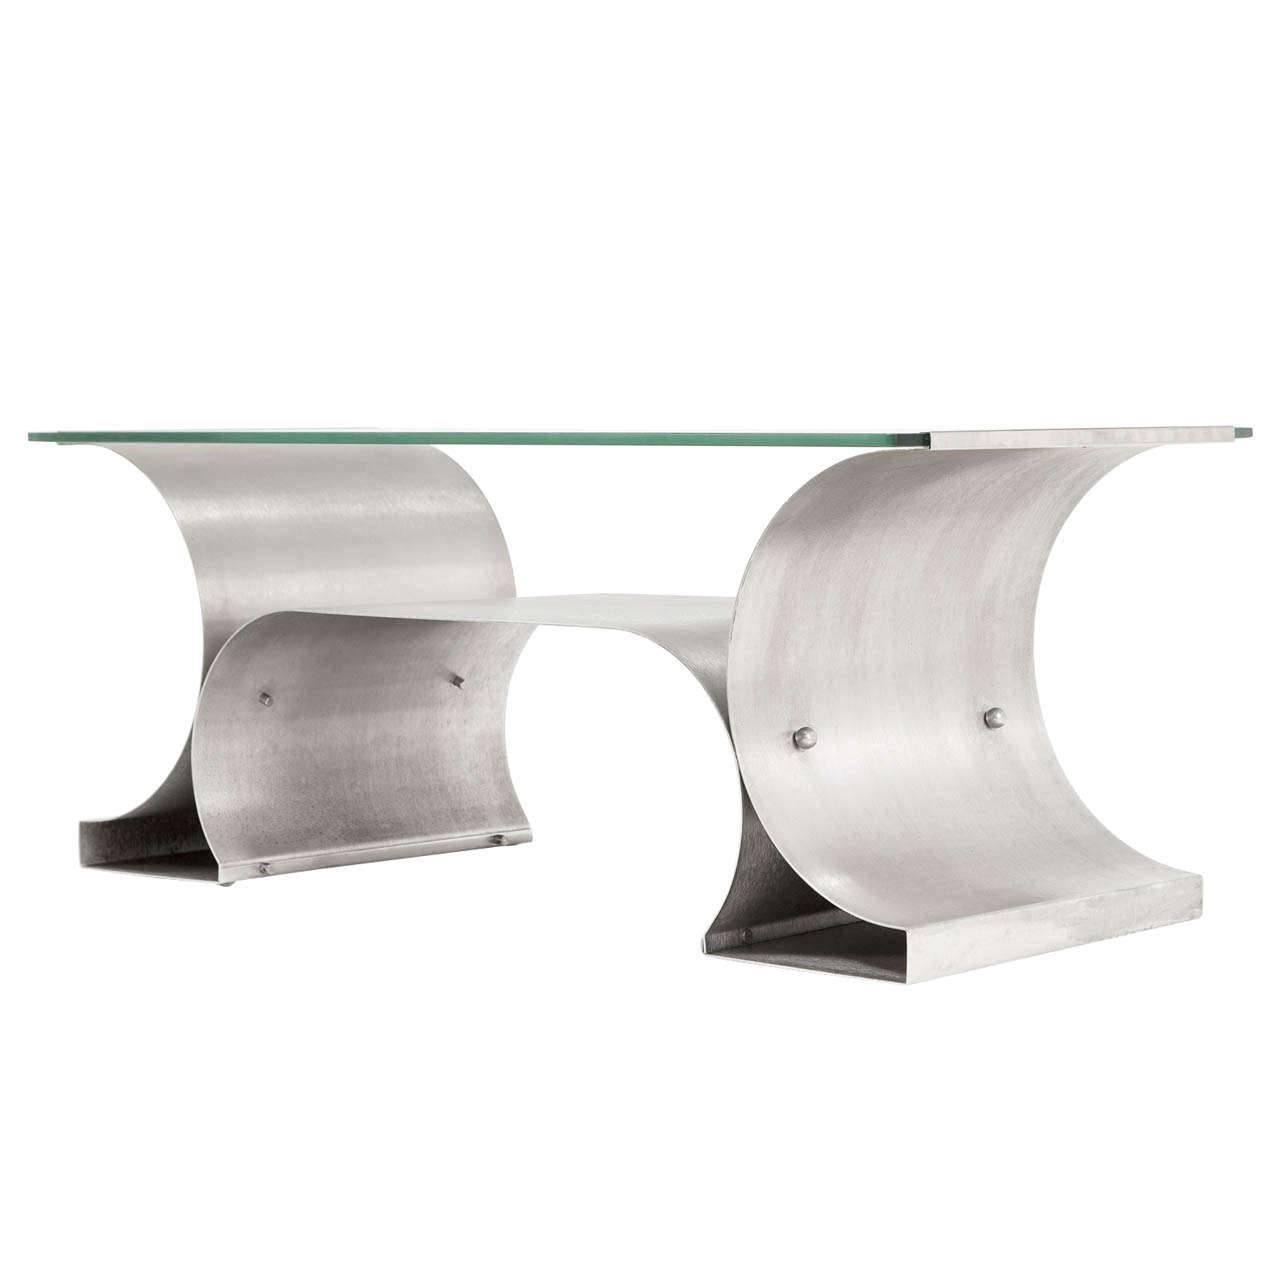 Michel Boyer Stainless Steel Coffee Table from the 'X Series'